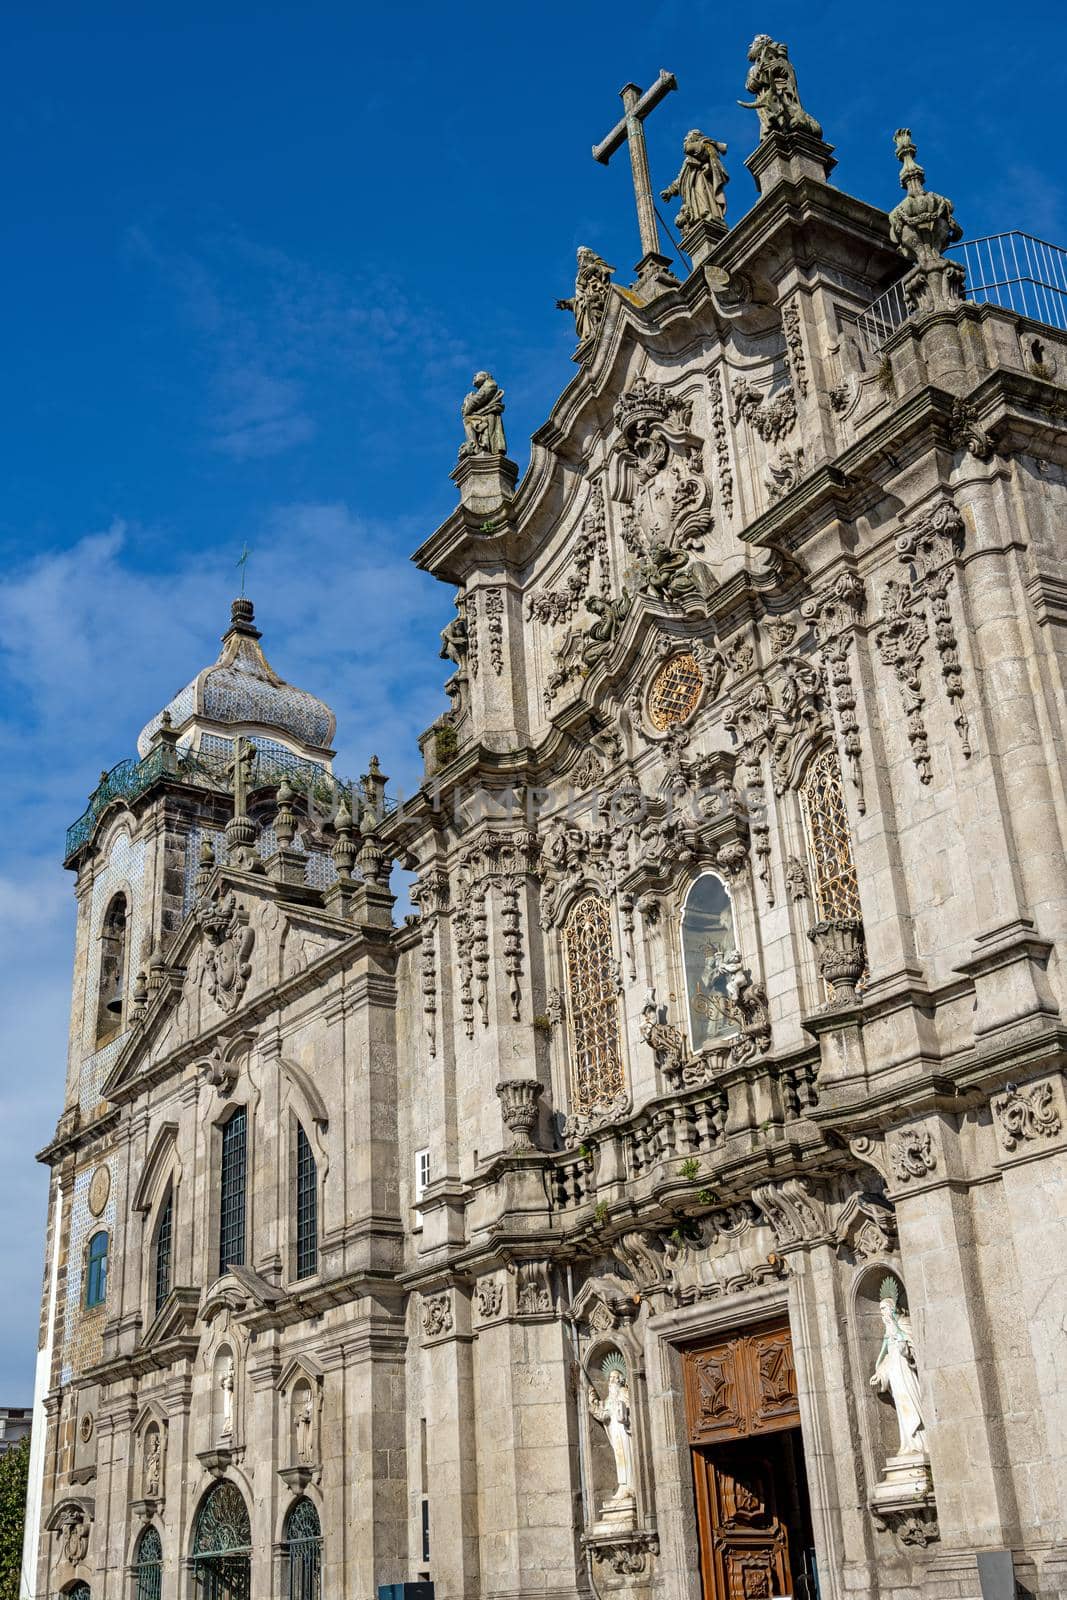 The Igreja do Carmo and the Igreja dos Carmelitas in Porto, two churches who stand side by side